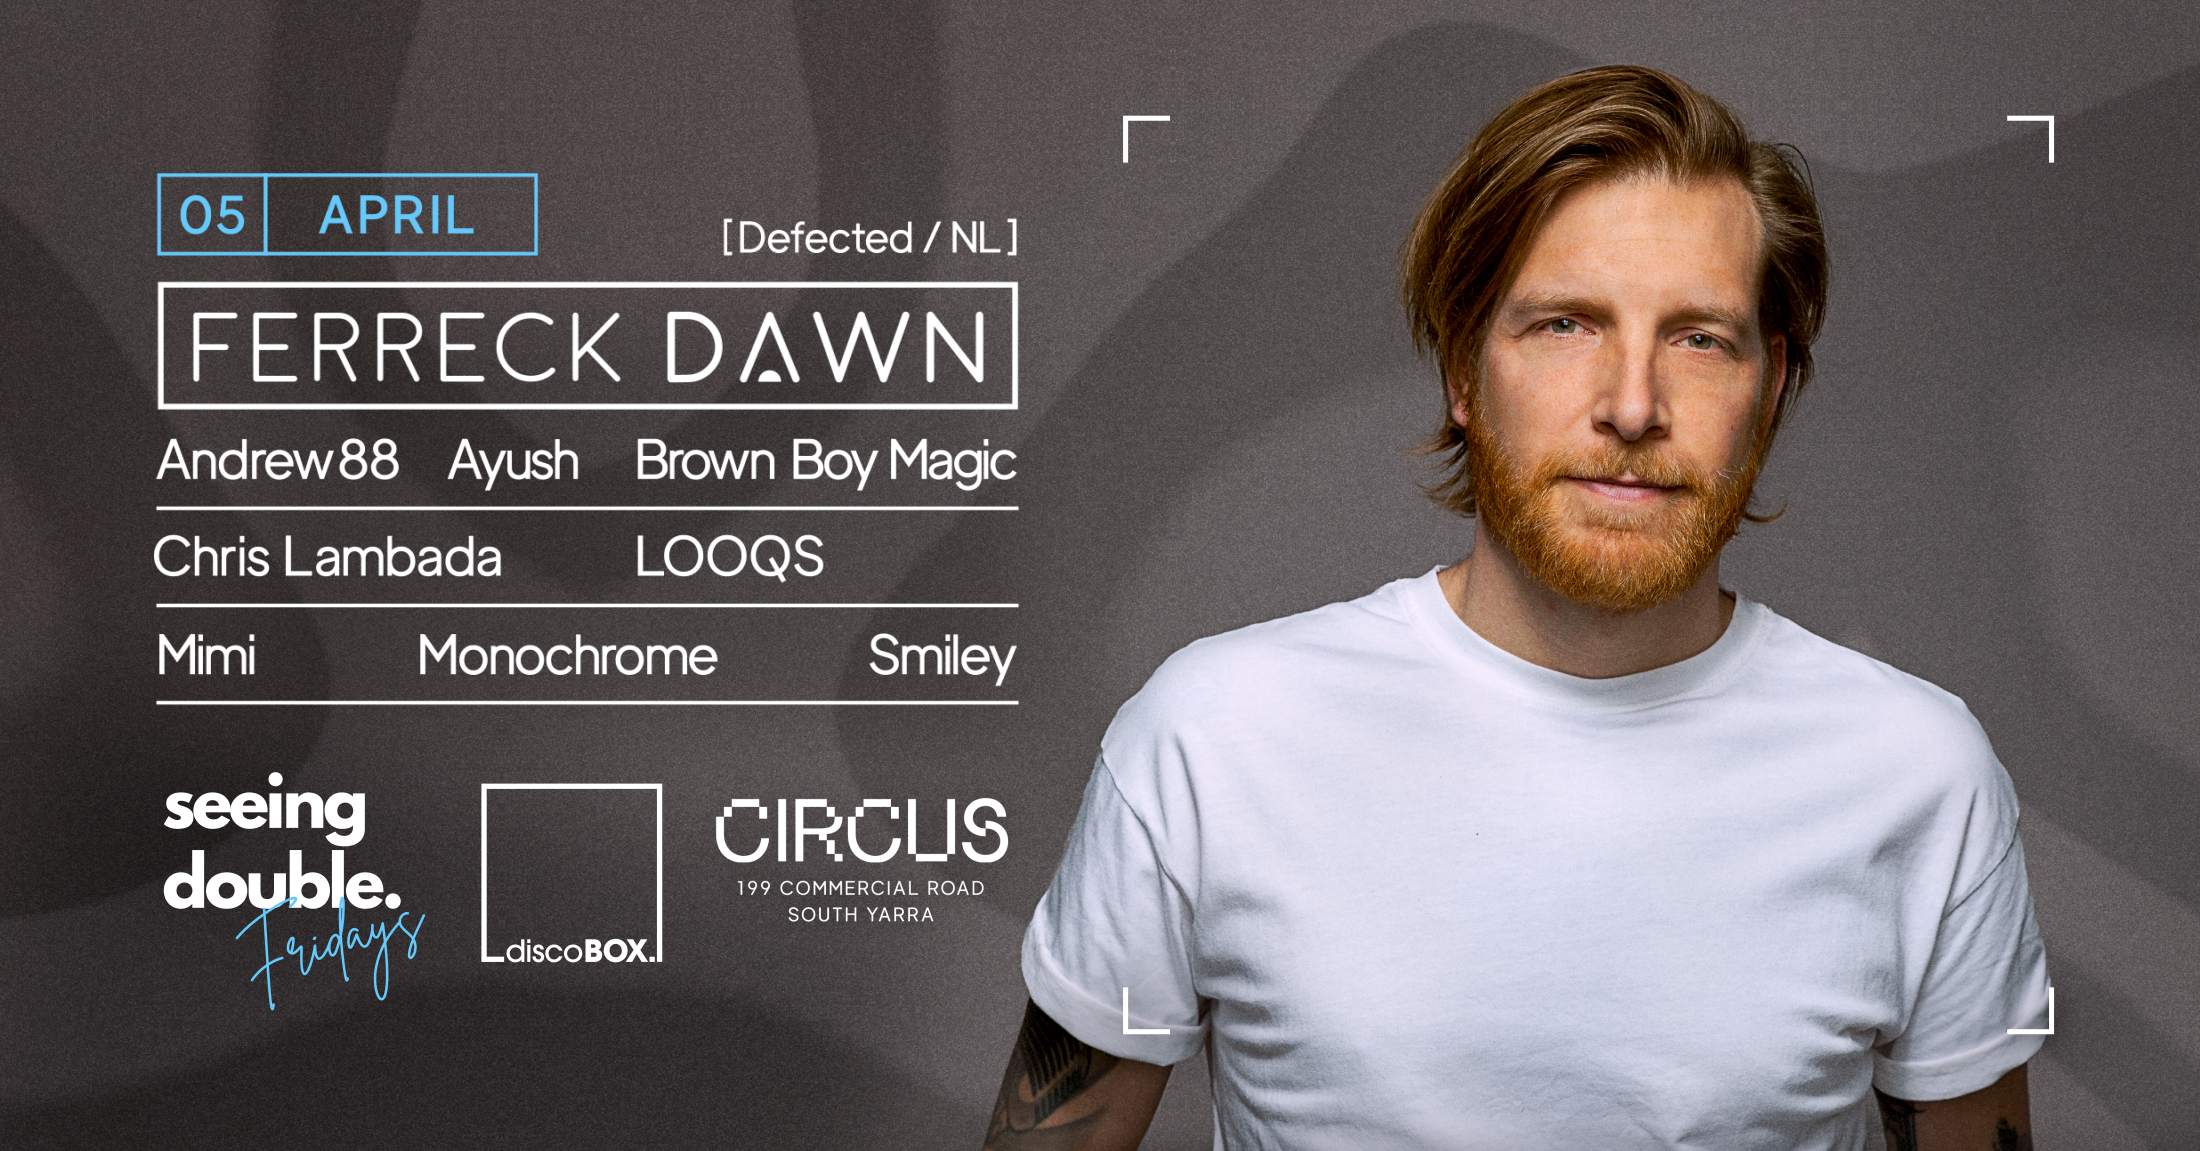 Ferreck Dawn (Defected/NL) at Circus - Seeing Double & discoBOX - フライヤー表